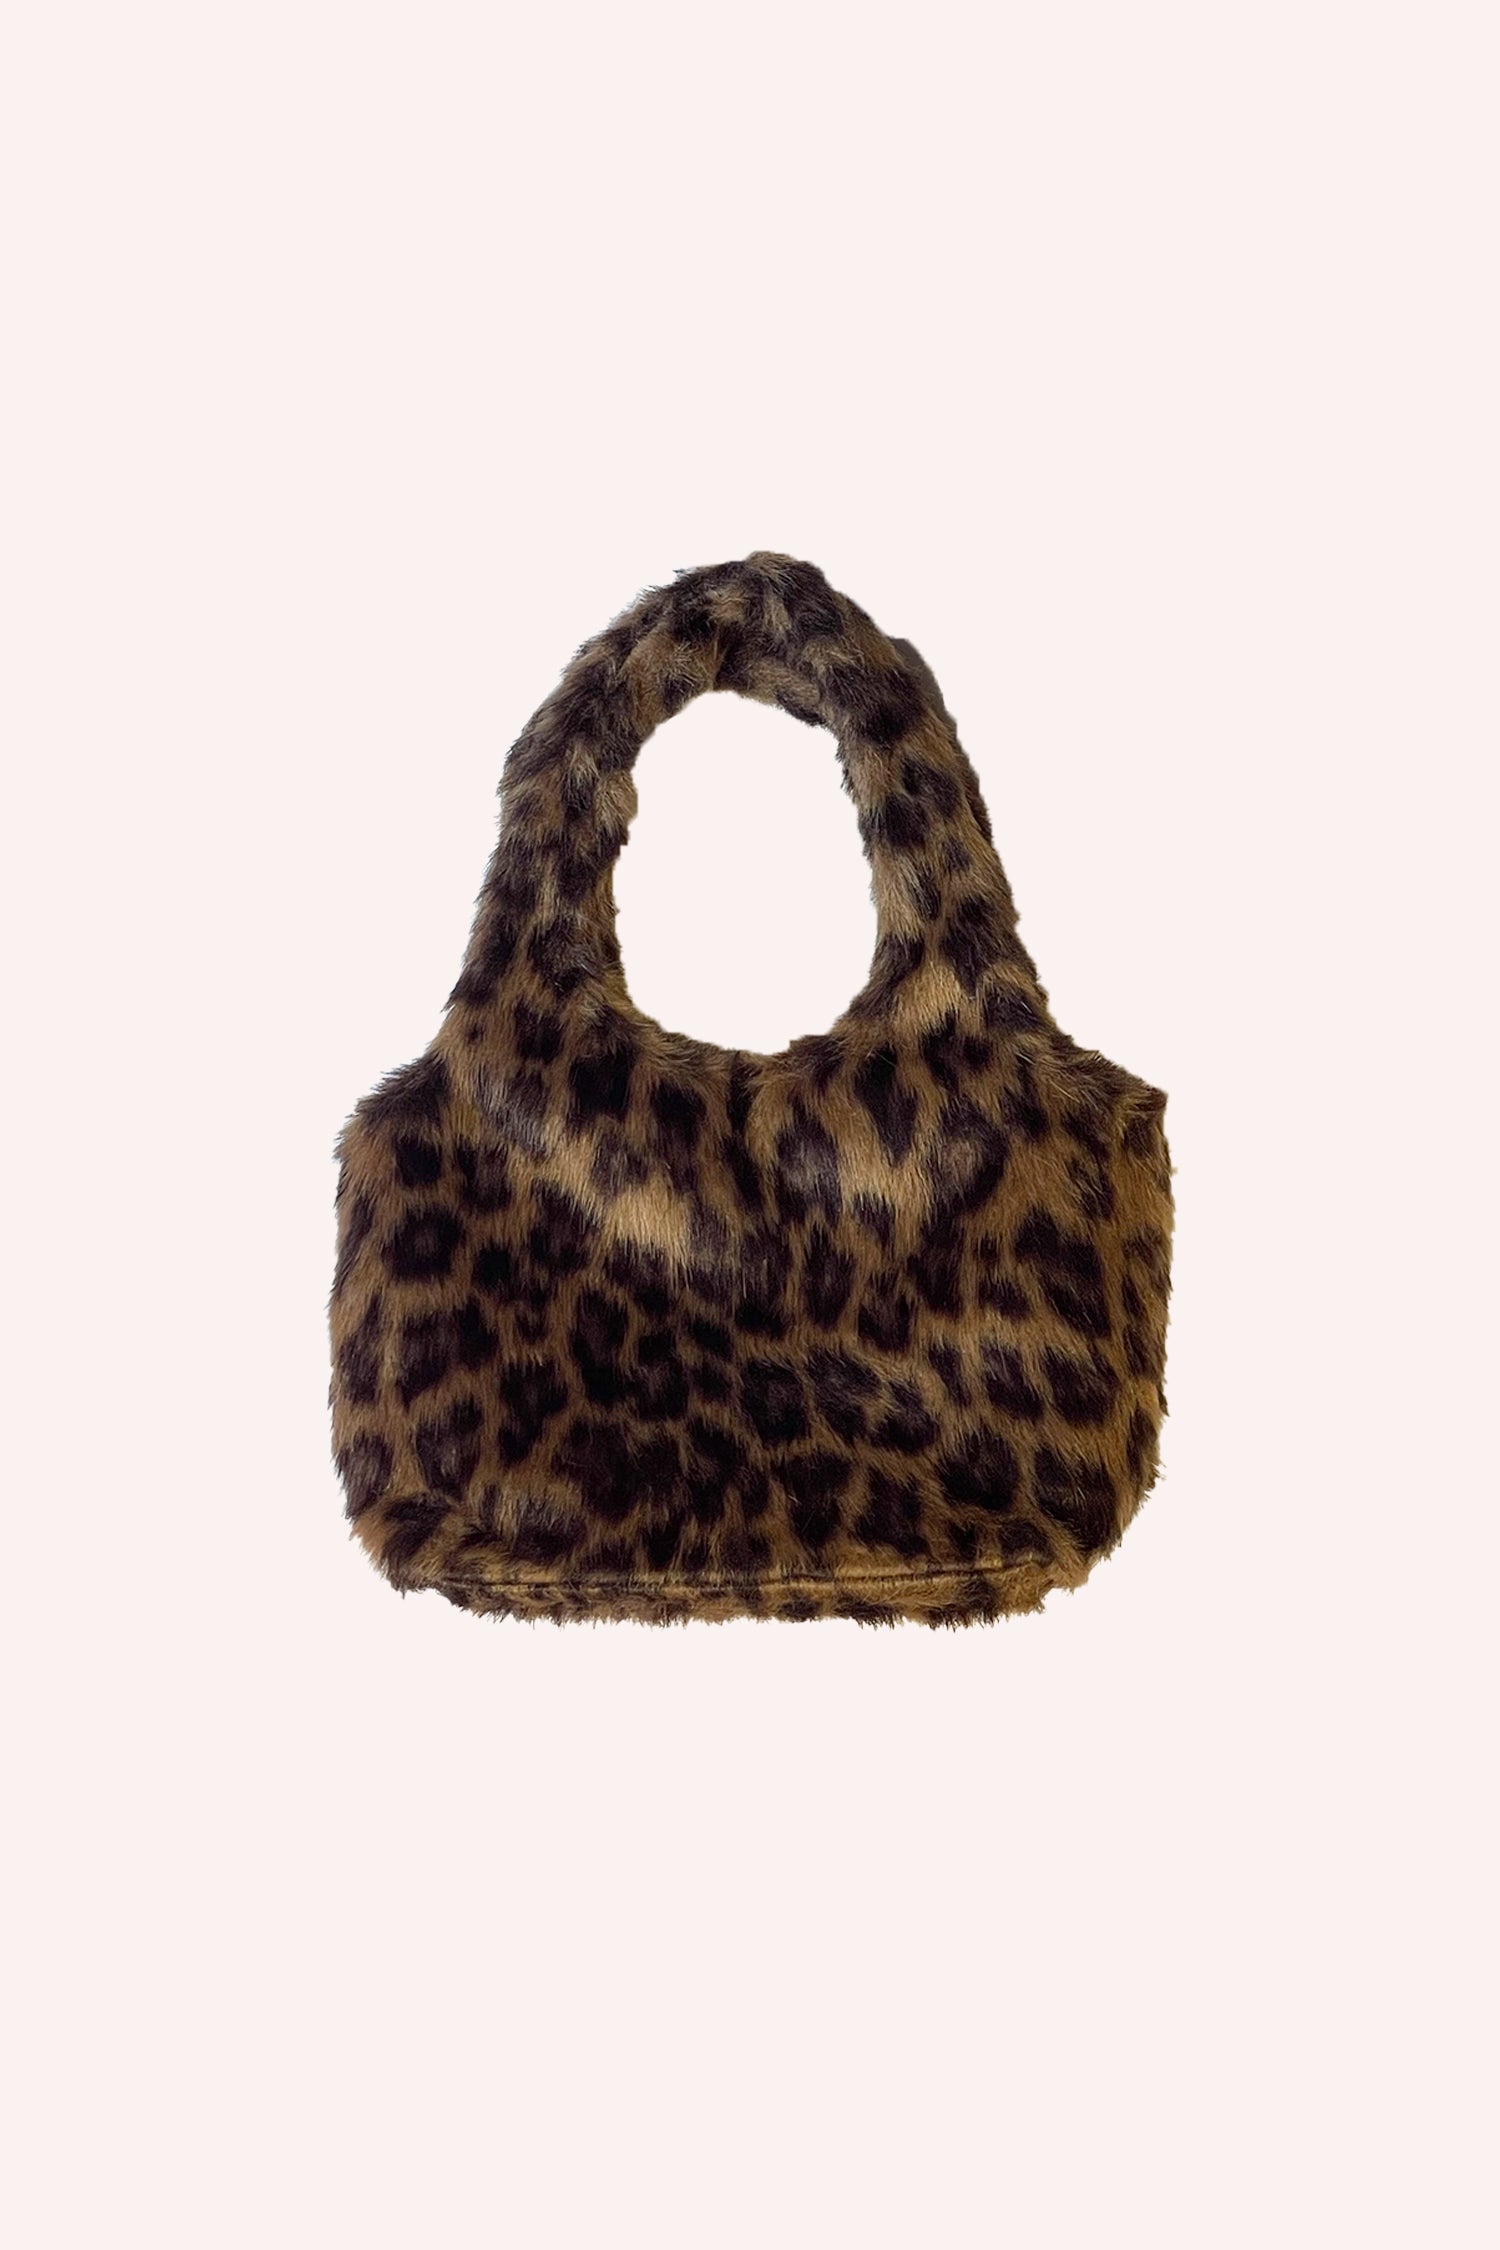 Mini Bag Leopard, hue of Brown fir in rectangle shape, with a round handle